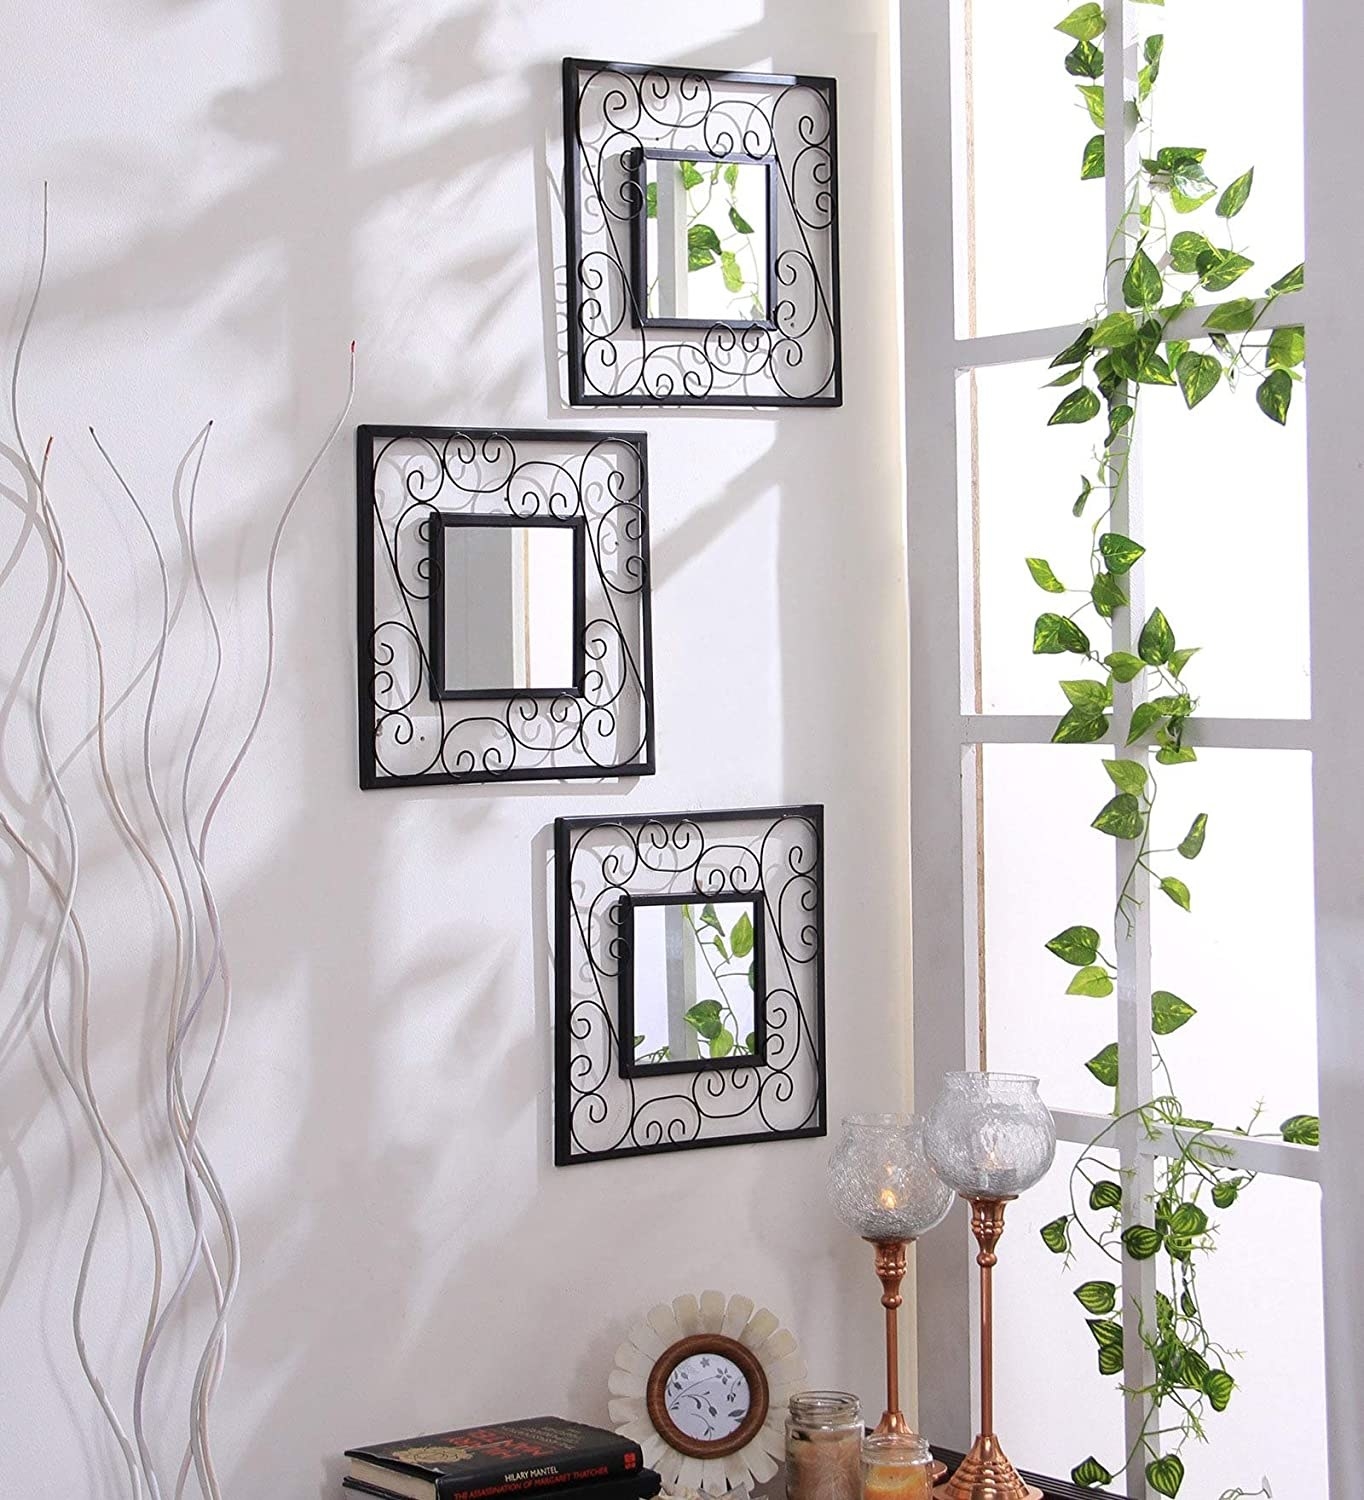 3 decorative mirrors are hung on a wall beside a window. 